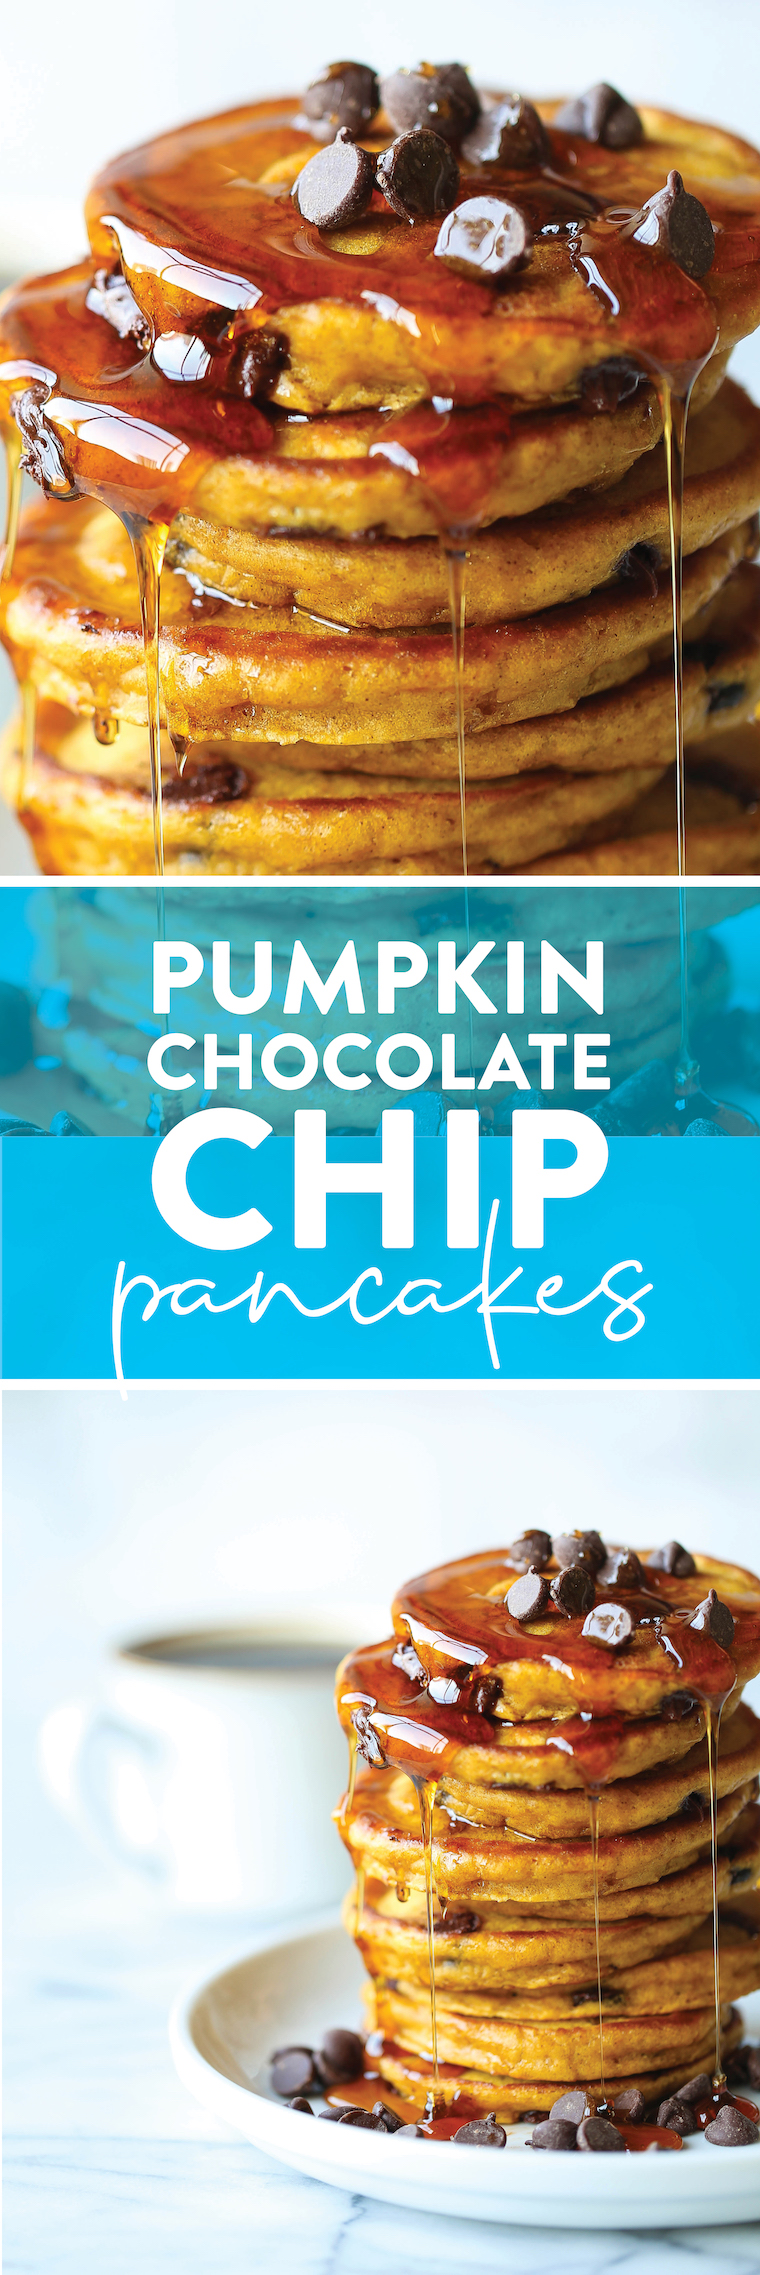 Pumpkin Chocolate Chip Pancakes - The most amazing pumpkin pancakes - so light + fluffy and made with semisweet chocolate chips. PERFECTION.